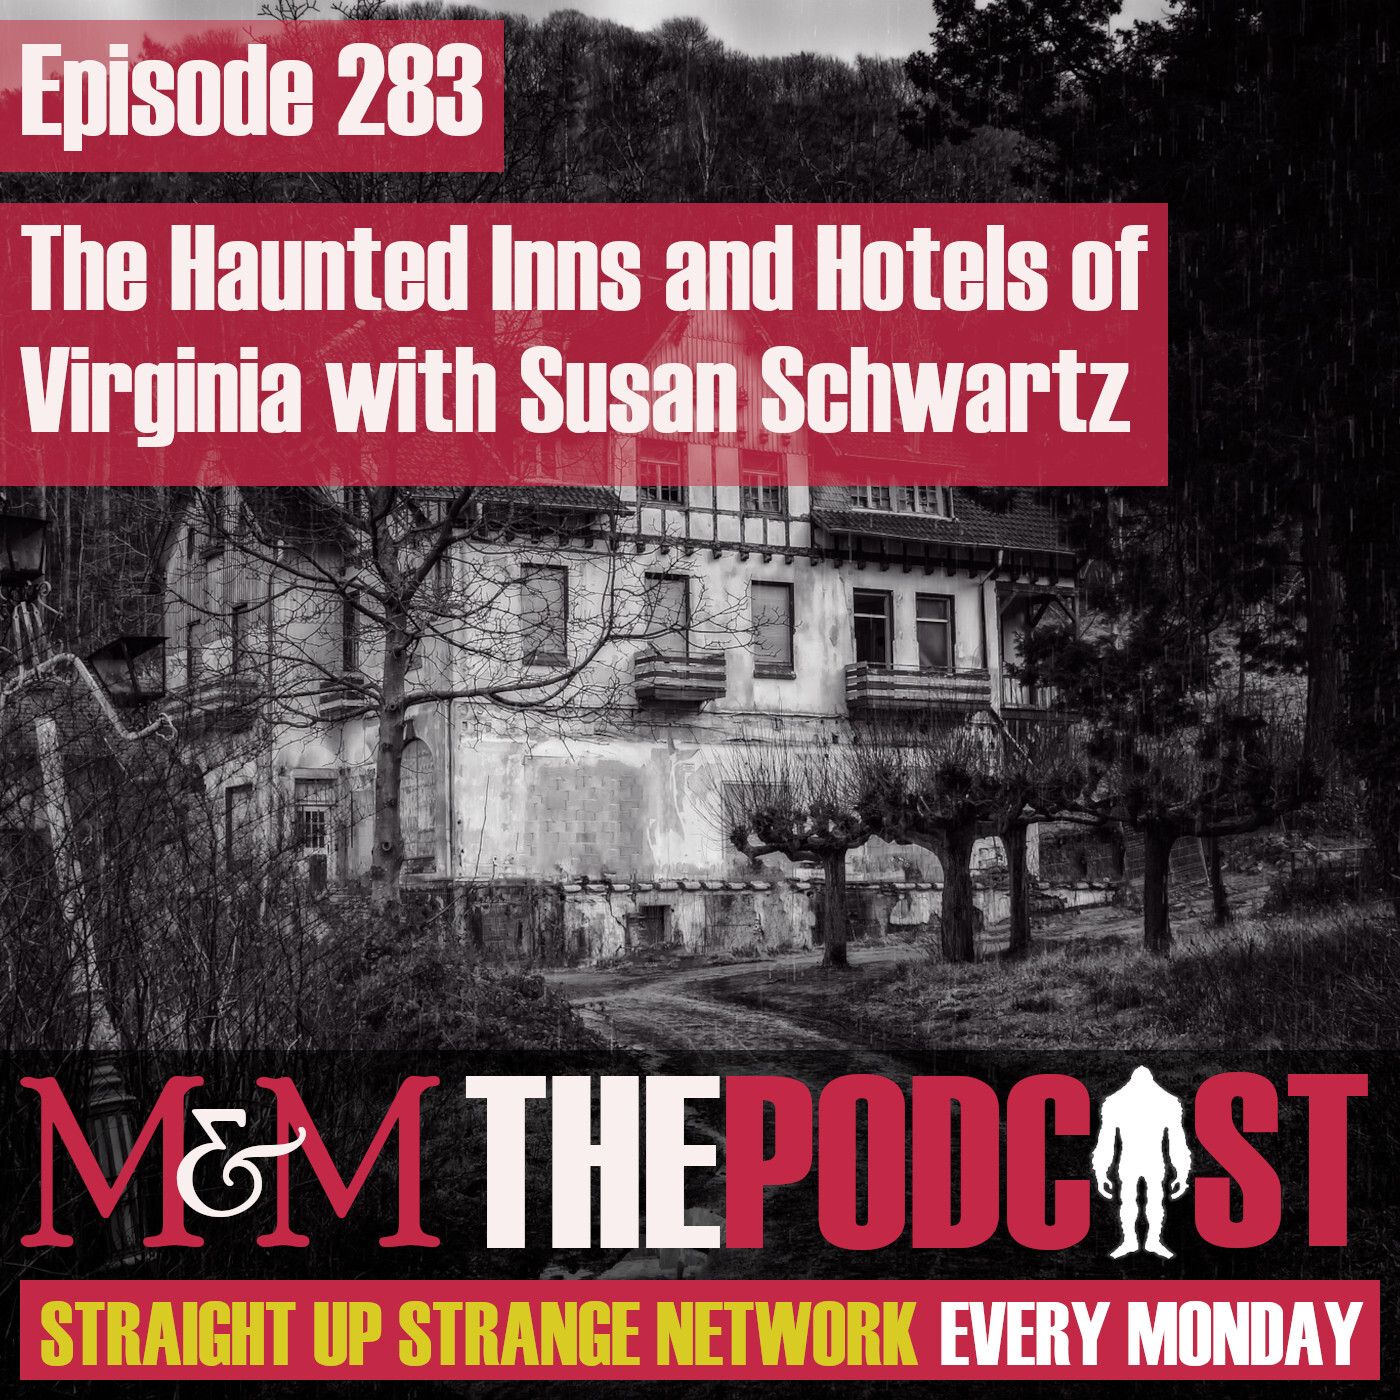 Mysteries and Monsters: Episode 283 The Haunted Inns and Hotels of Virginia with Susan Schwartz